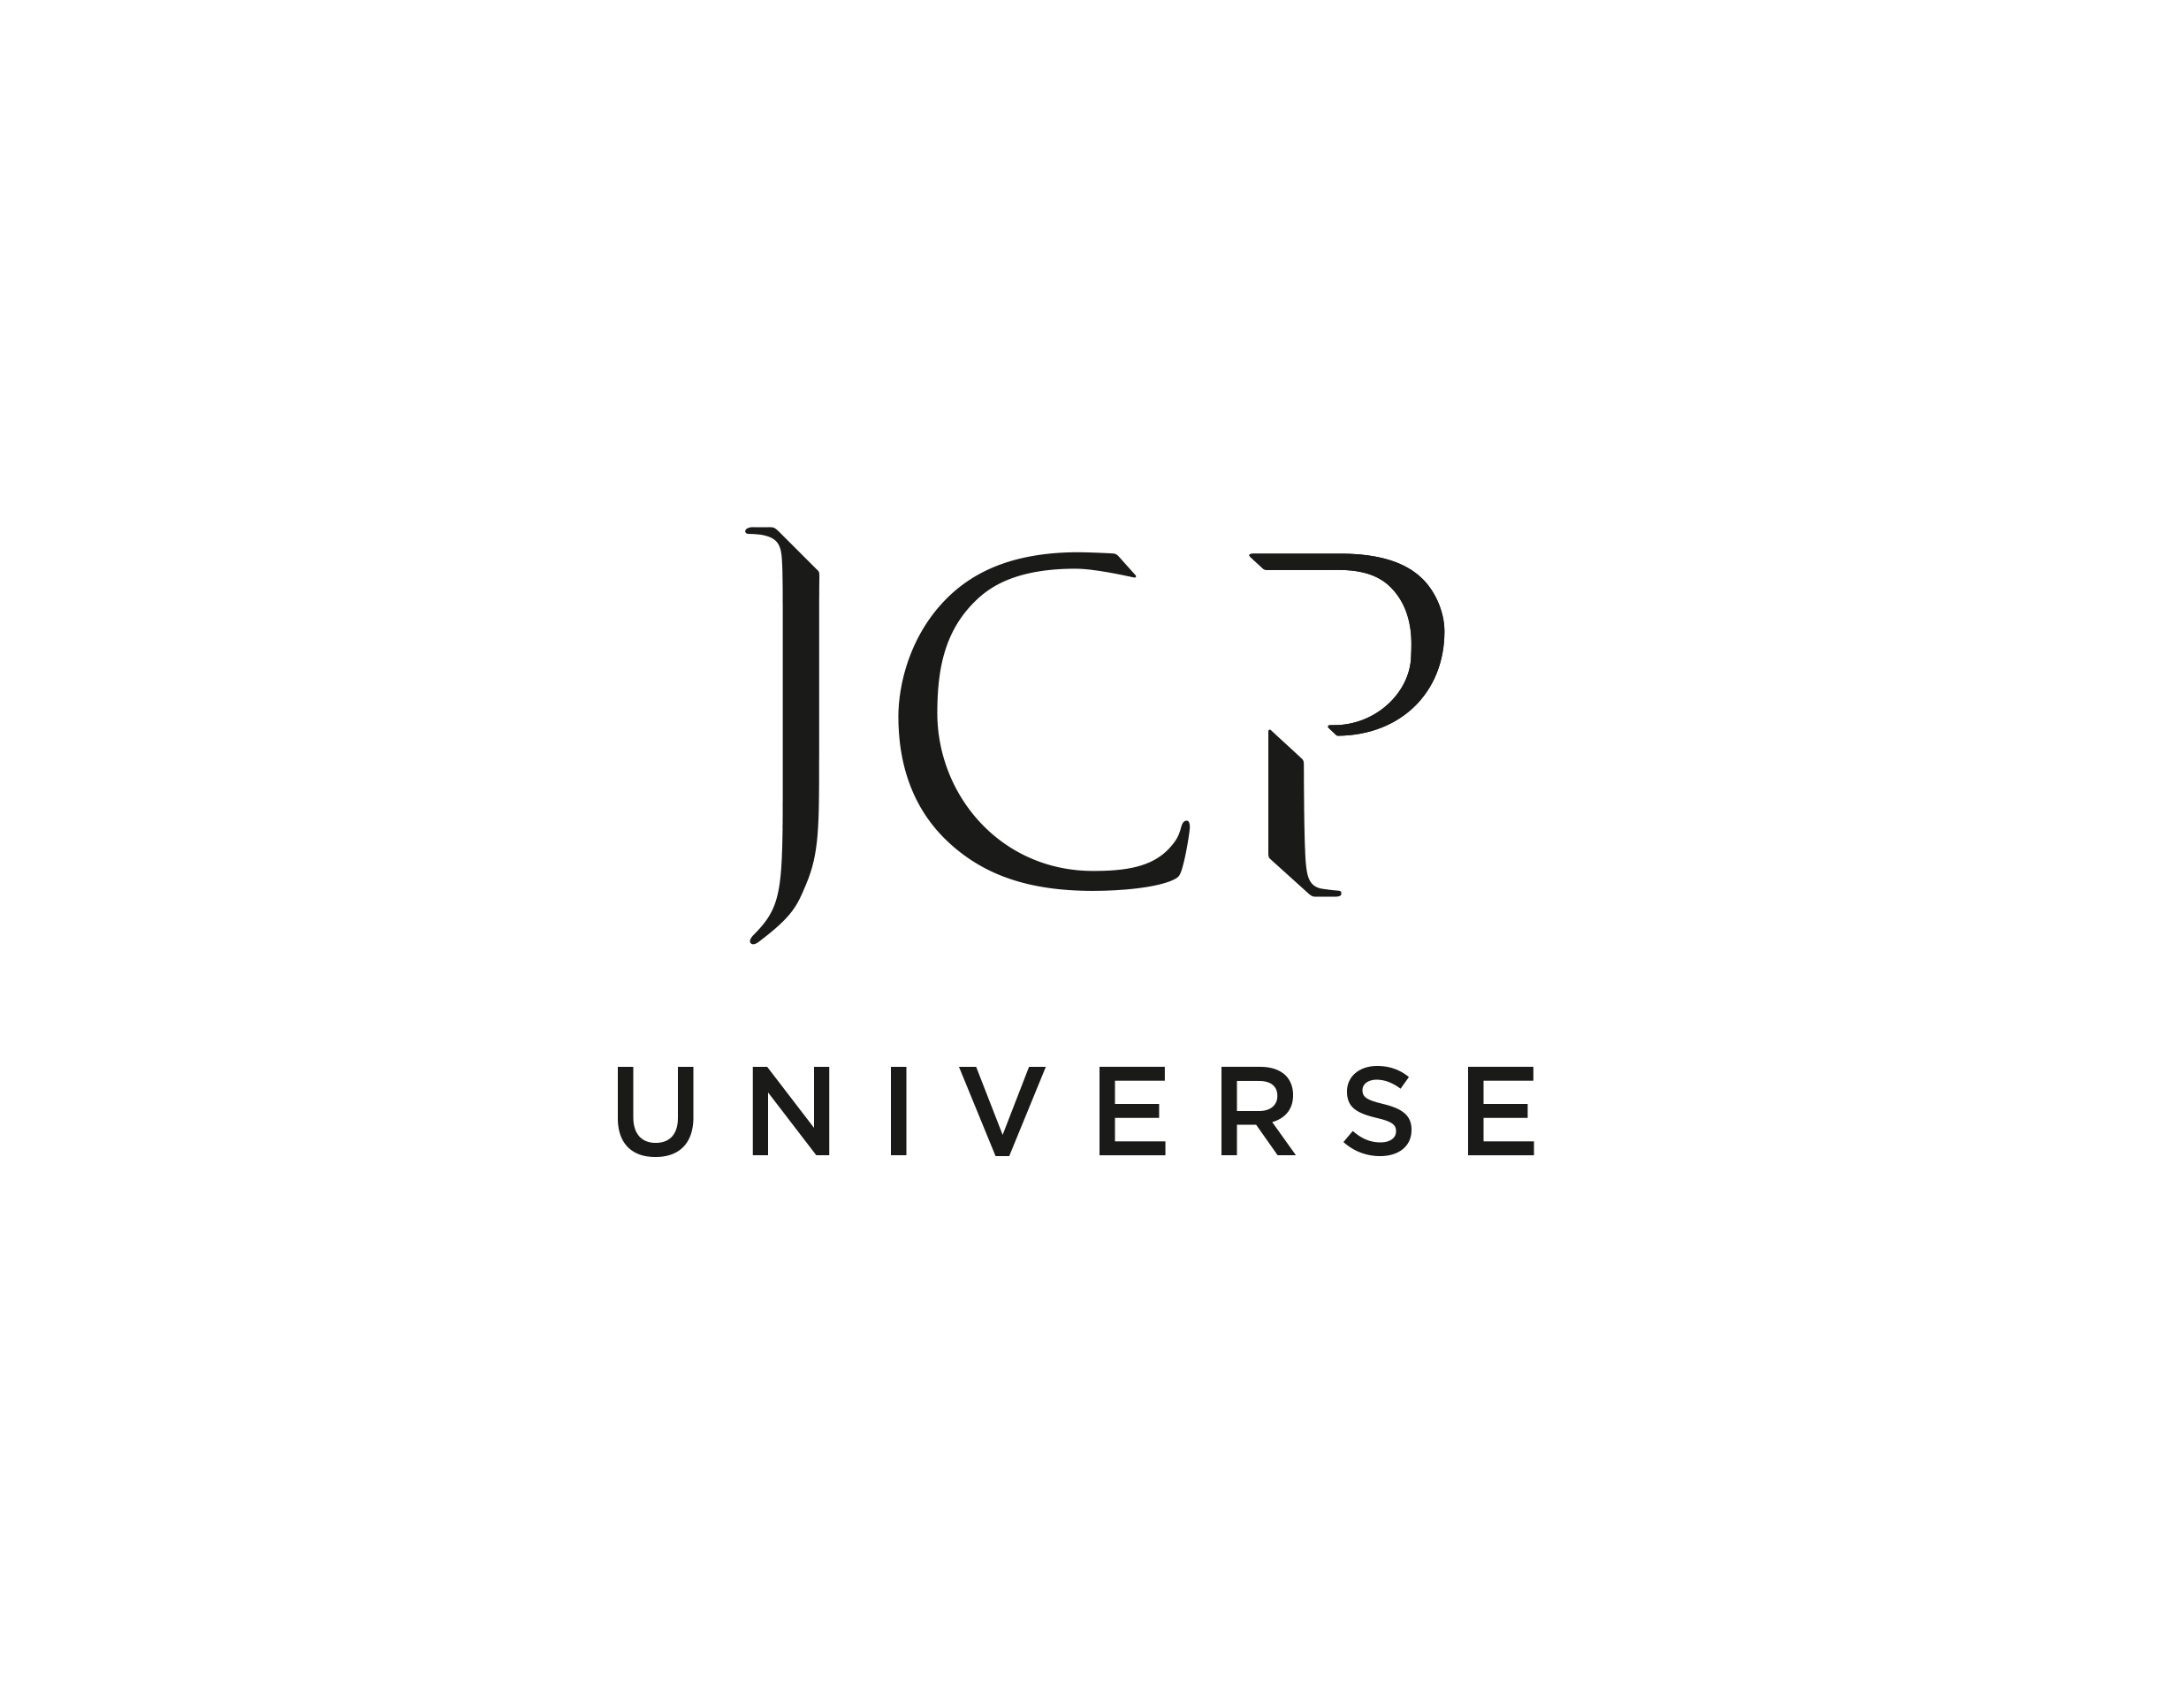 JCP Universe - Another nature